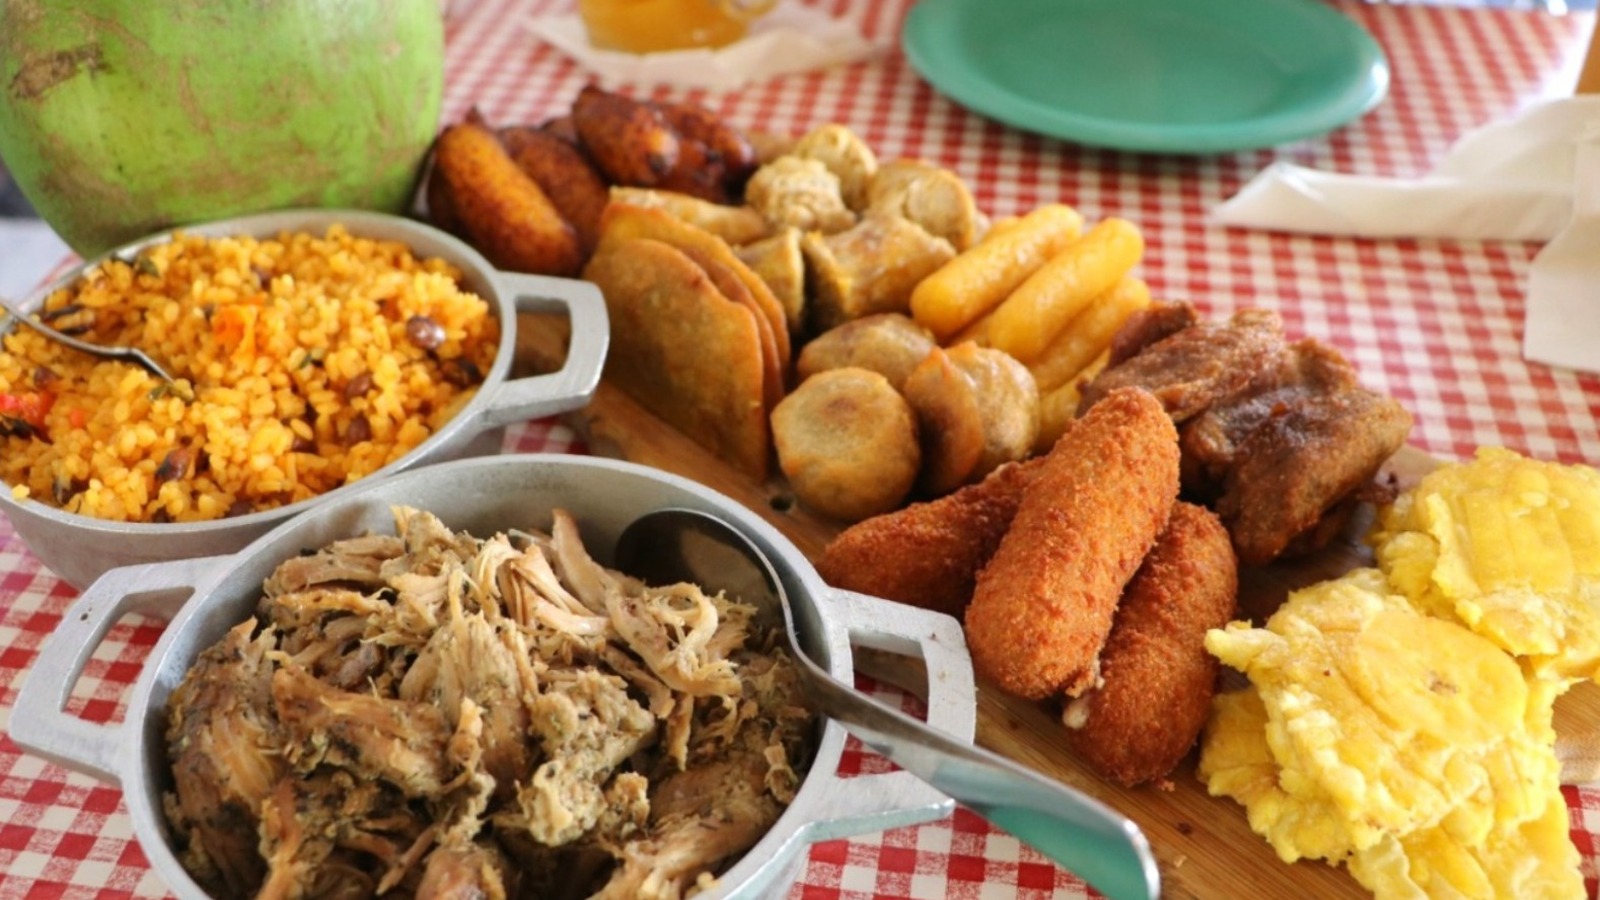 https://www.mashed.com/img/gallery/puerto-rican-foods-you-need-to-try-at-least-once-in-your-lifetime/l-intro-1636561998.jpg